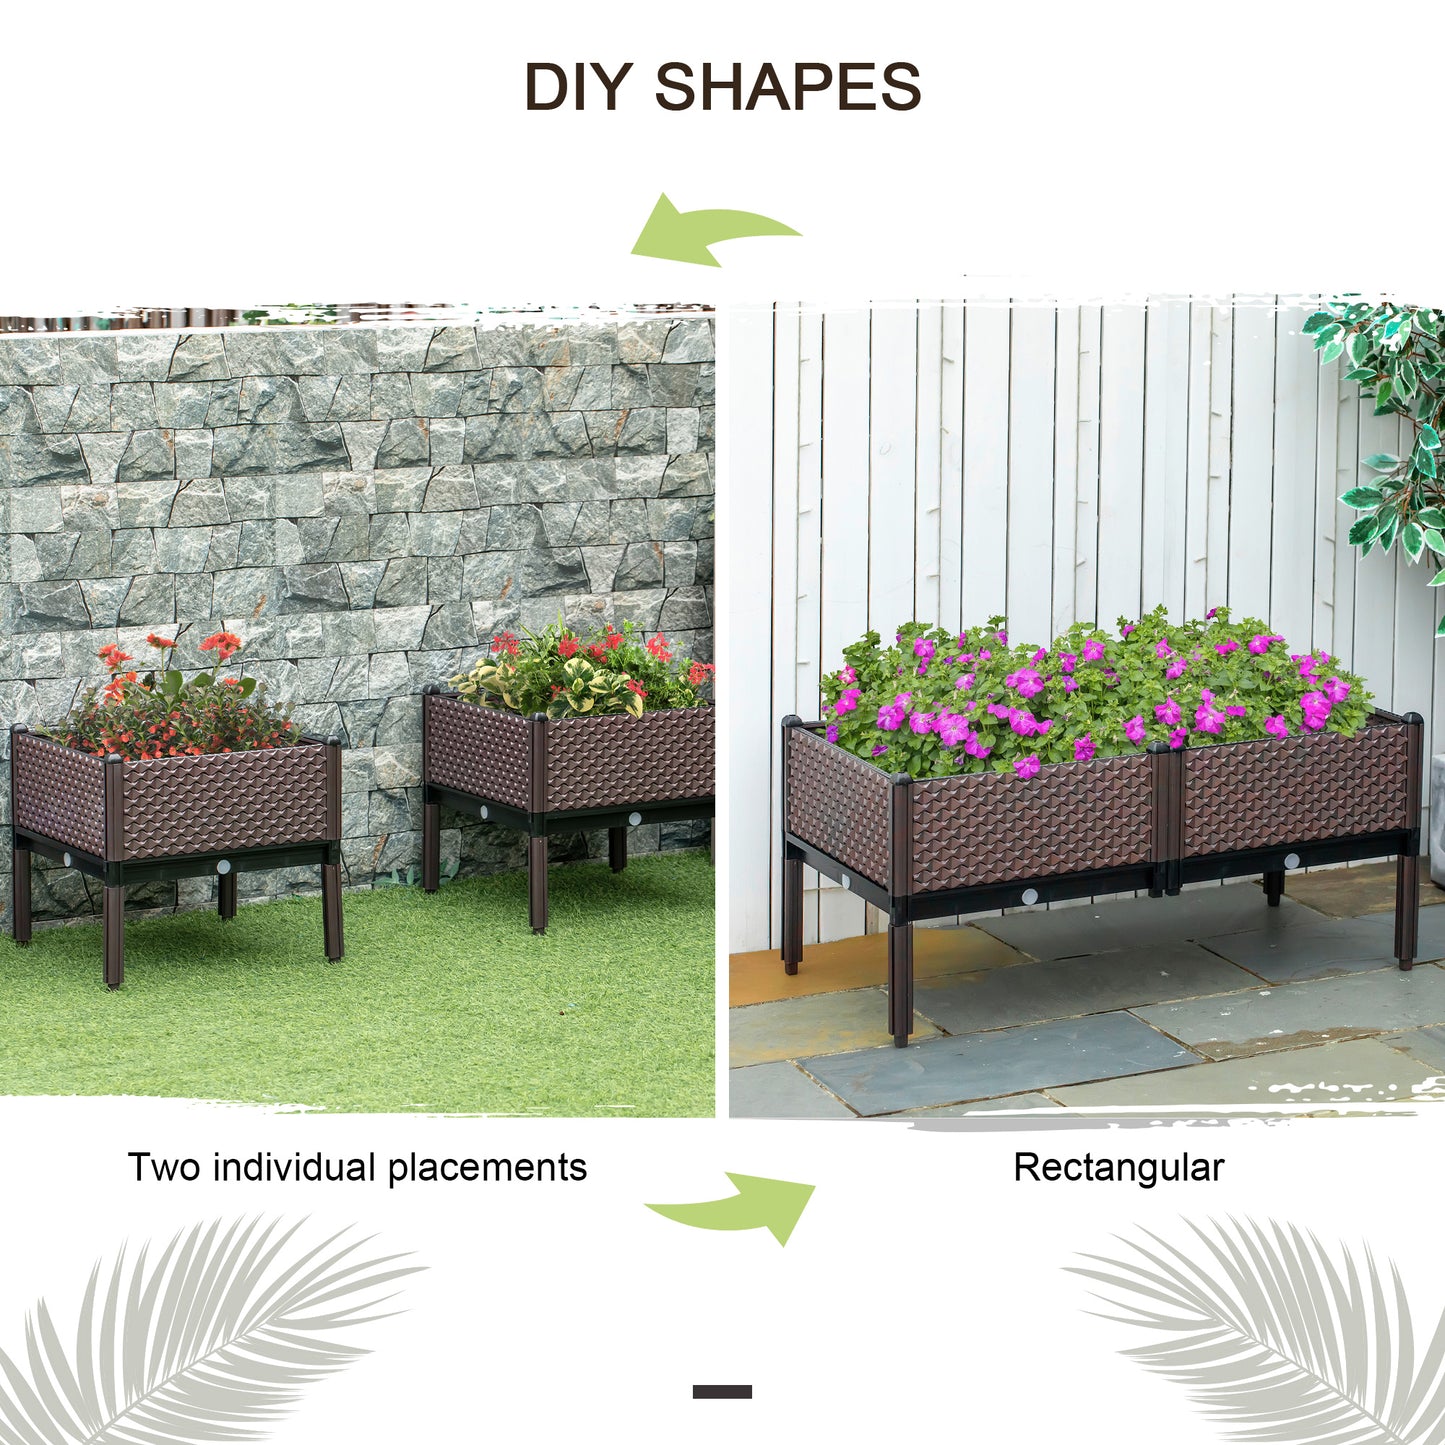 Outsunny 50cm x 50cm x 46.5cm Set of 2 Garden Raised Bed, Elevated Planter Box, Flower Vegetables Planting Container with Self-Watering Design